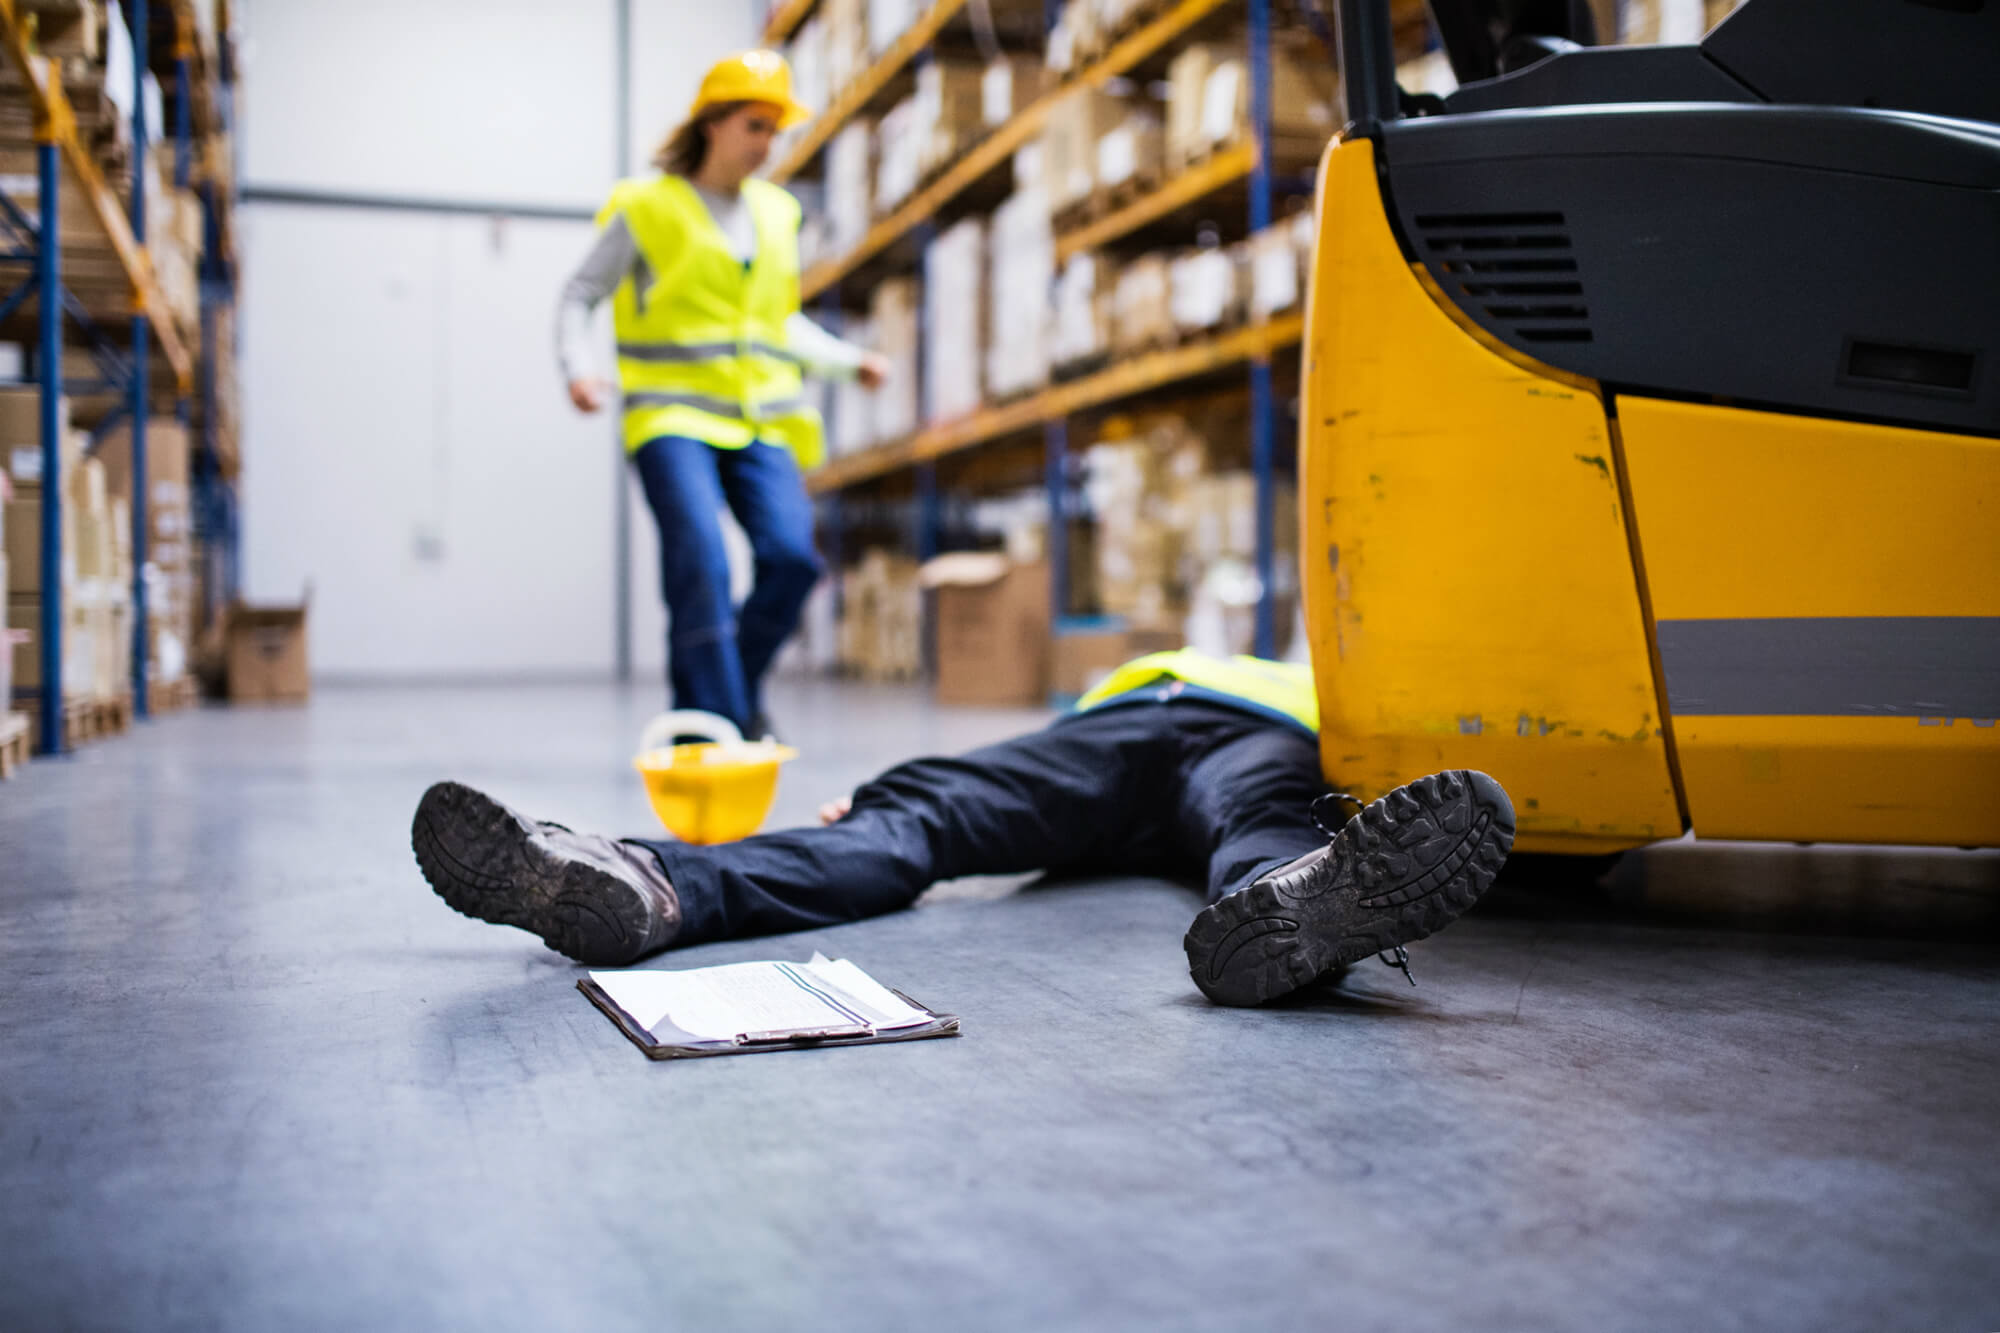 4 Common Forklift Accidents - And How to Prevent Them